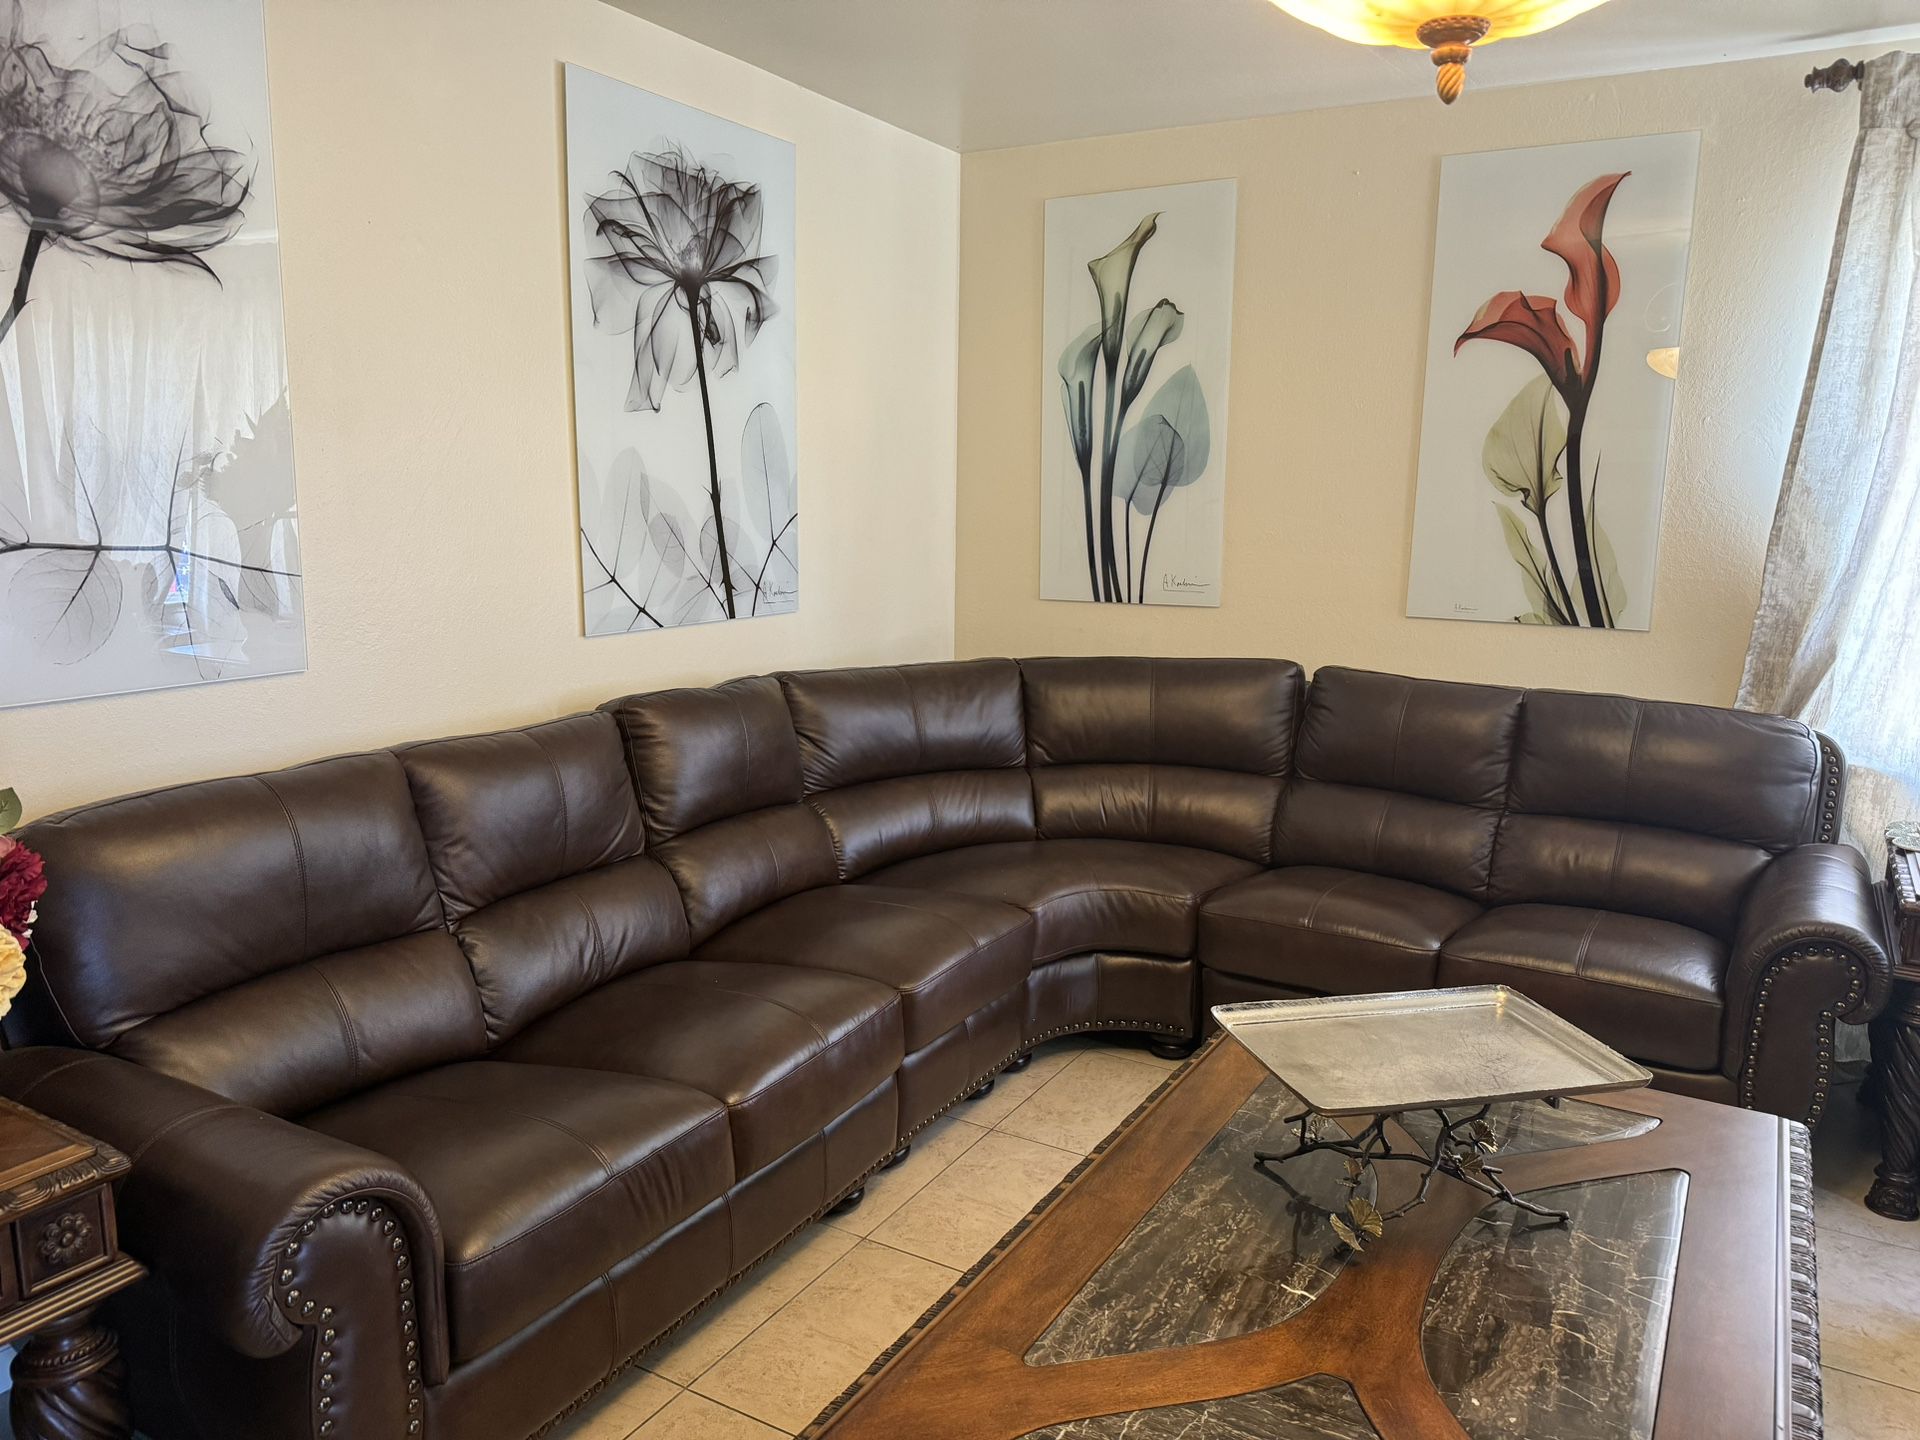 Beautiful set of leather couches